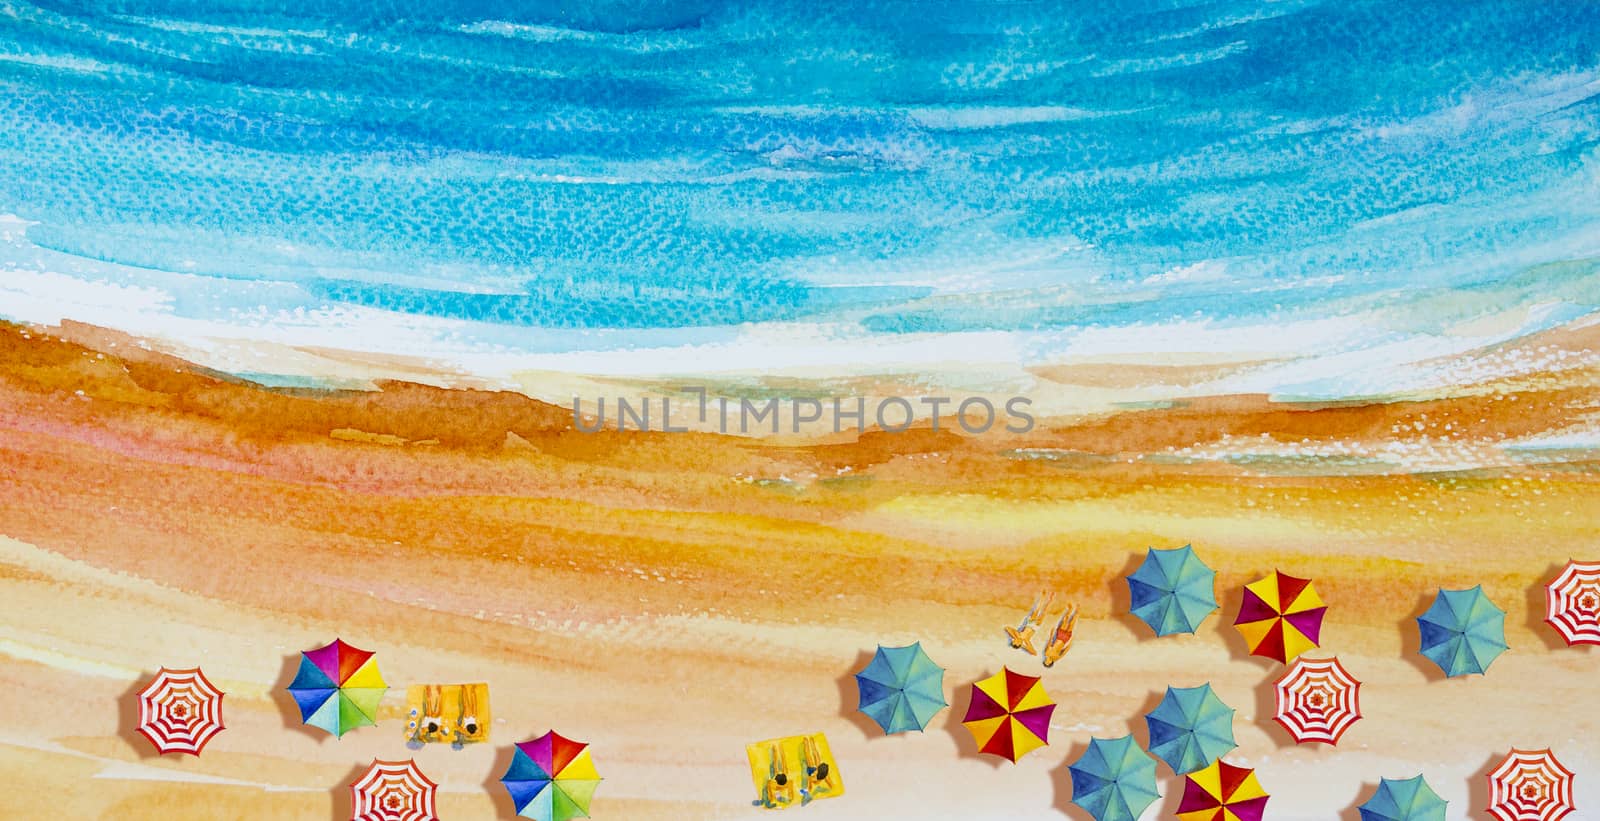 Painting watercolor seascape Top view colorful of lovers, family vacation and tourism in summery,multi colored umbrella, sea wave blue background. Painted Impressionist, abstract image illustration.